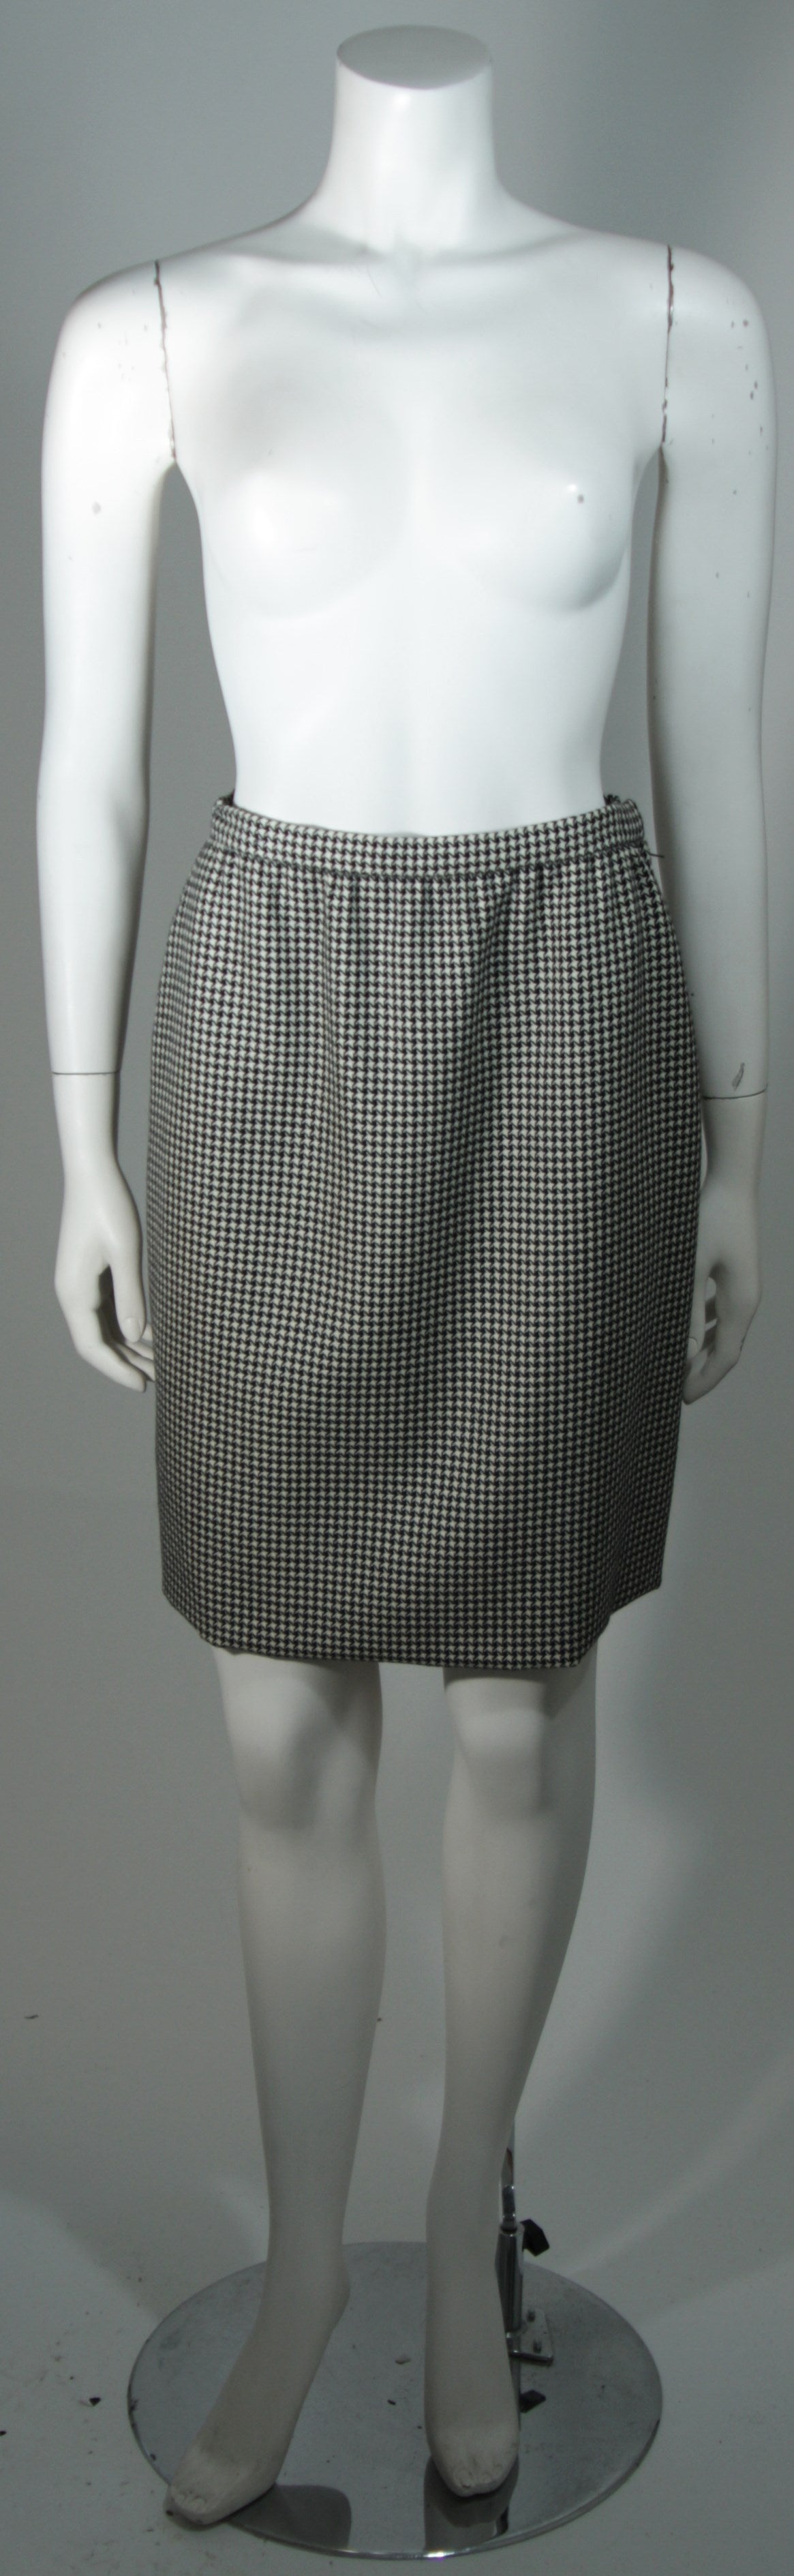 Galanos Couture Grey Houndstooth Skirt Suit Size 2 4 4